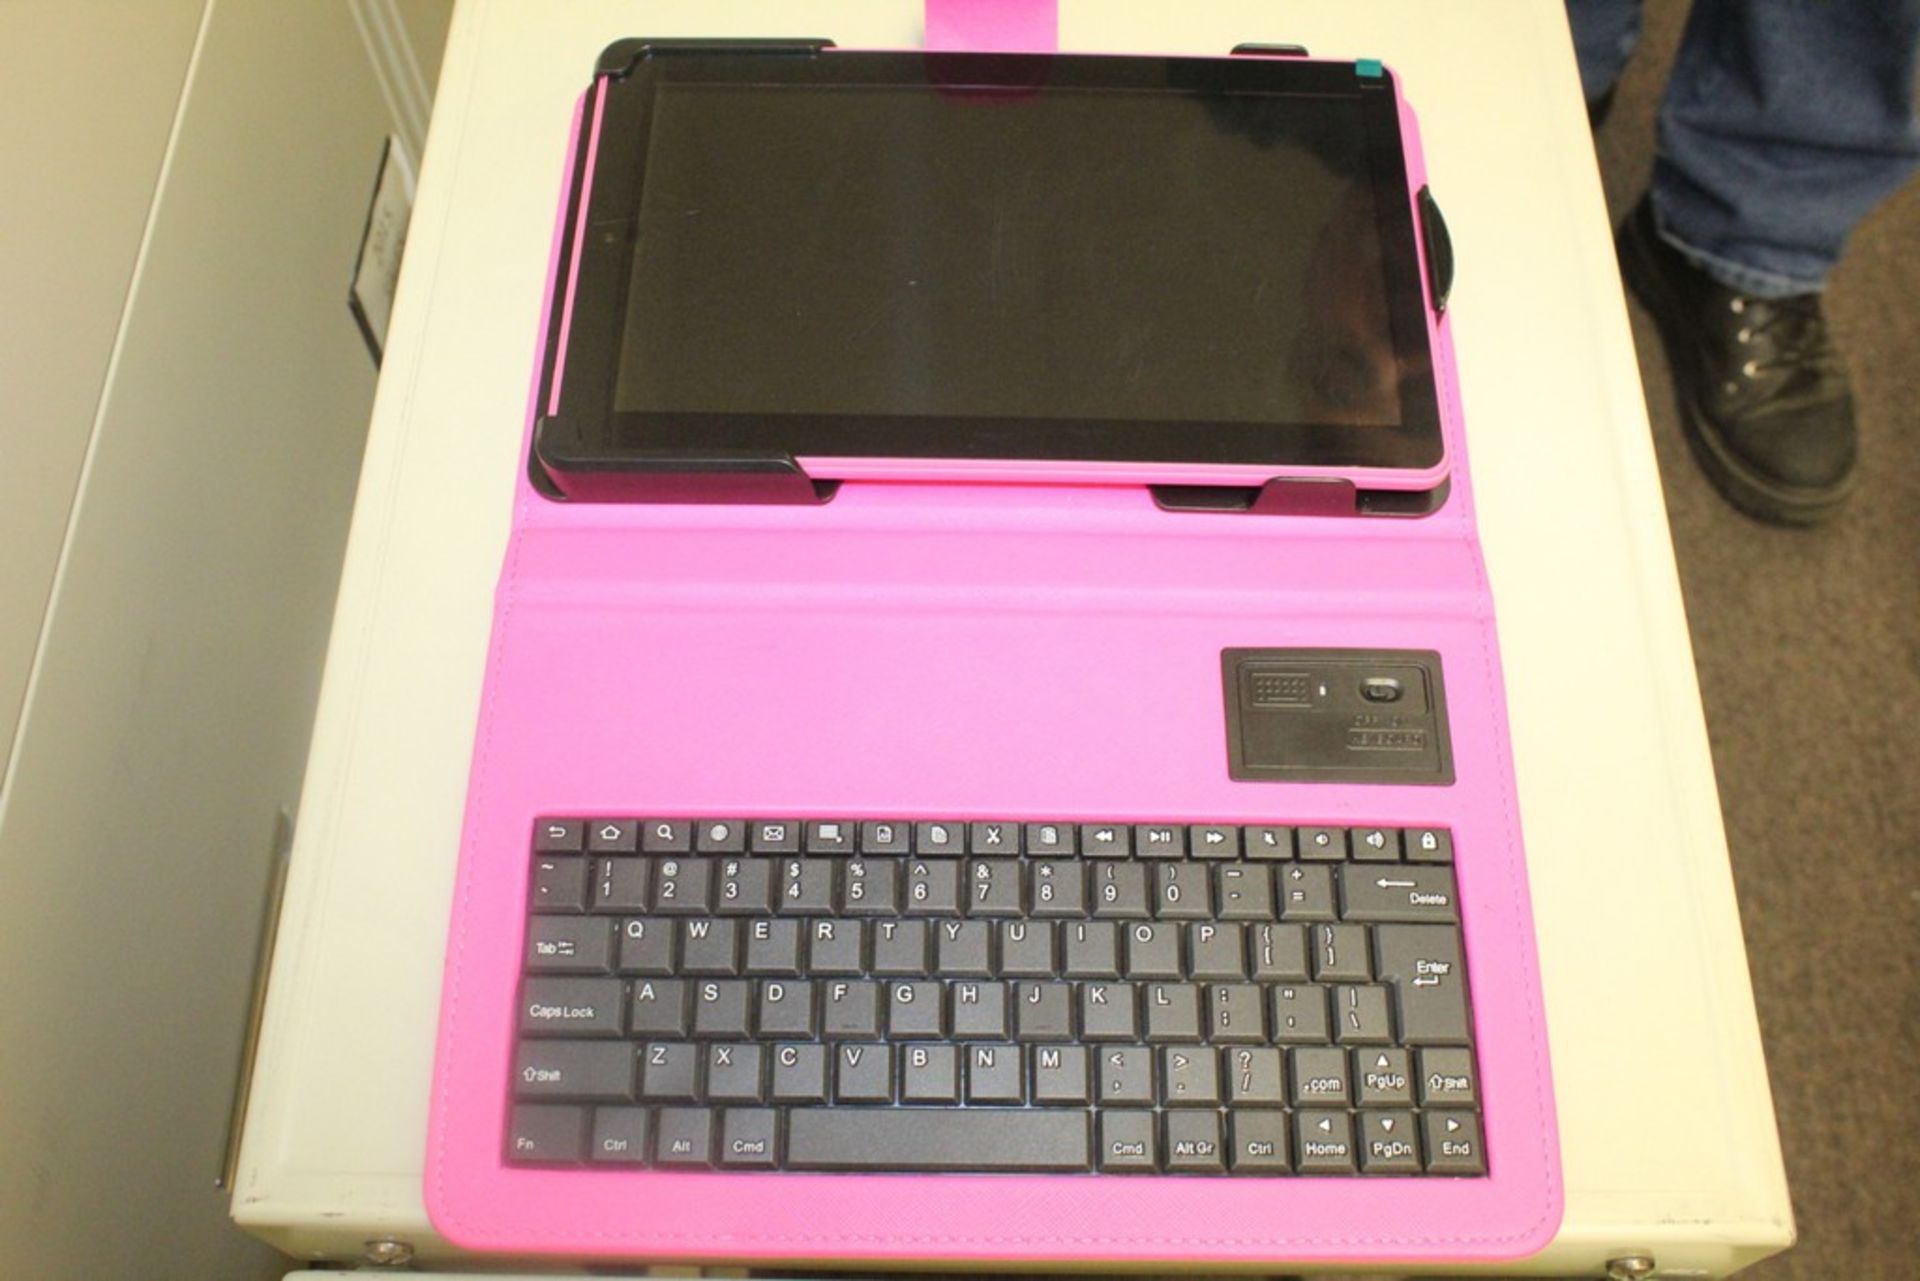 ELECTRO BRAND MODEL RKT6773W22K8 10" TABLET WITH KEYBOARD AND CARRYING CASE